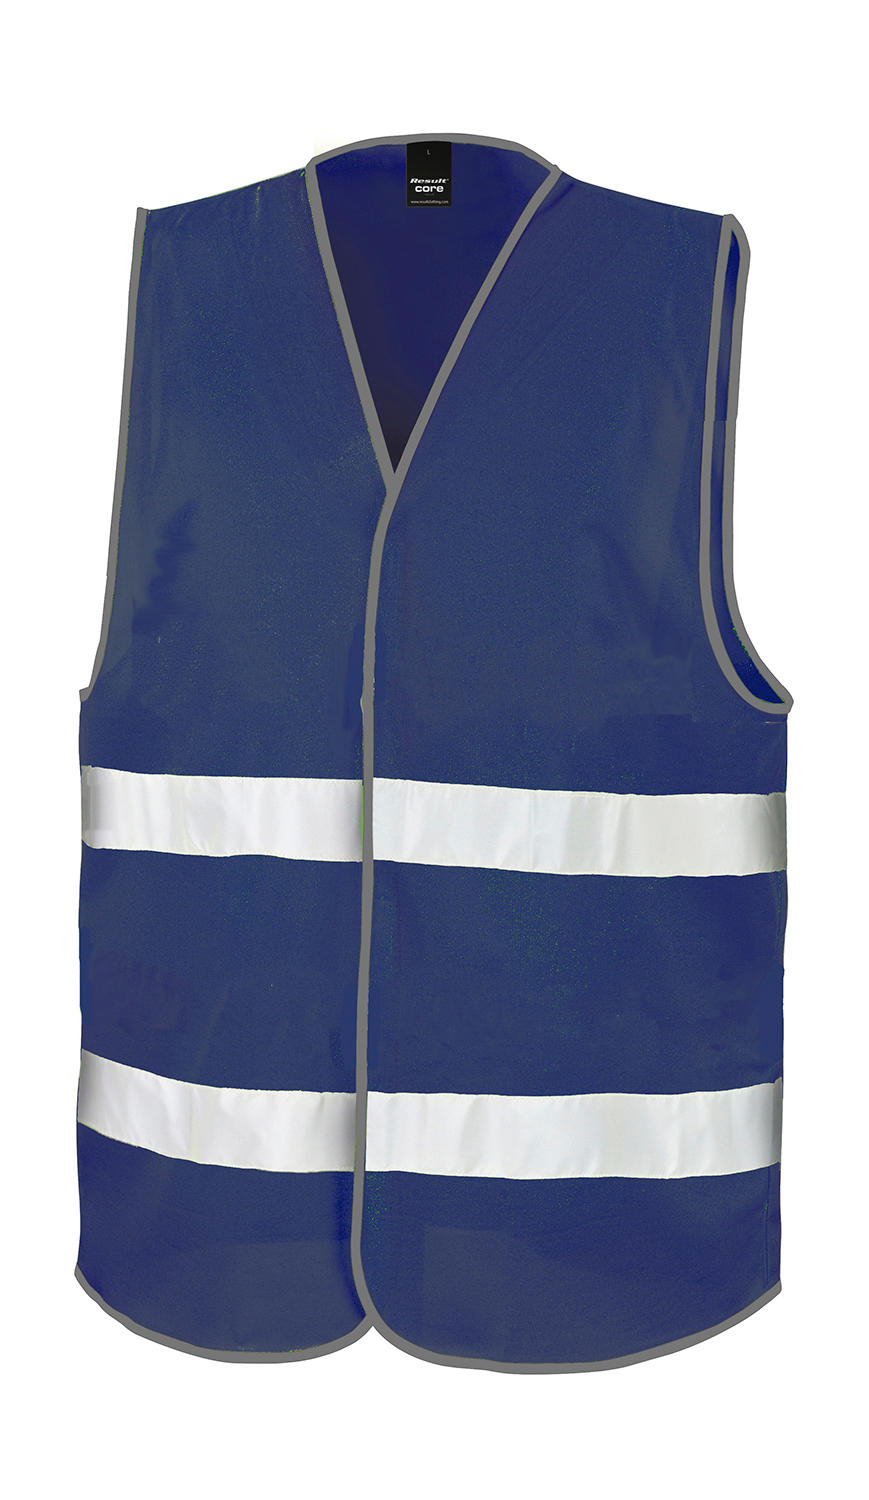  Core Enhanced Visibility Vest in Farbe Navy